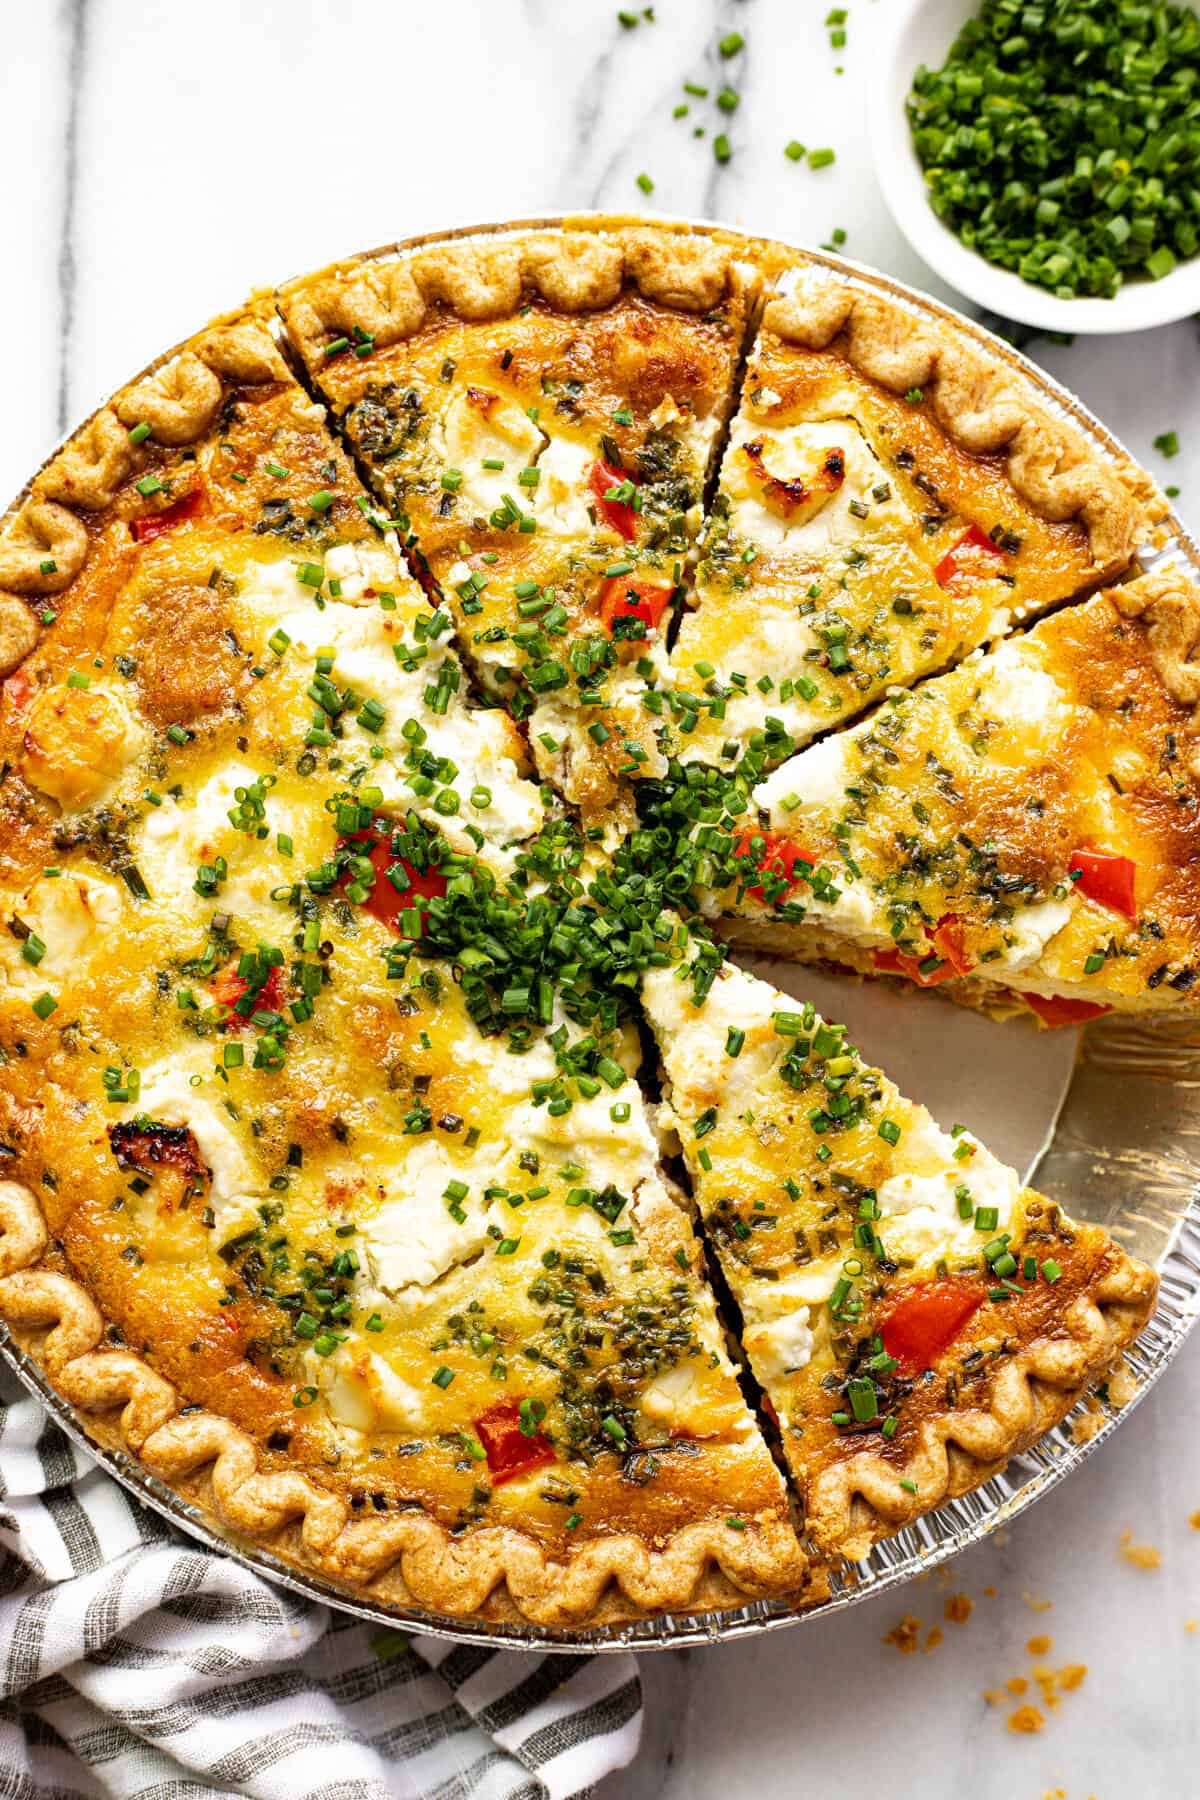 Overhead shot of a sliced quiche with red peppers and potatoes garnished with sliced chives.